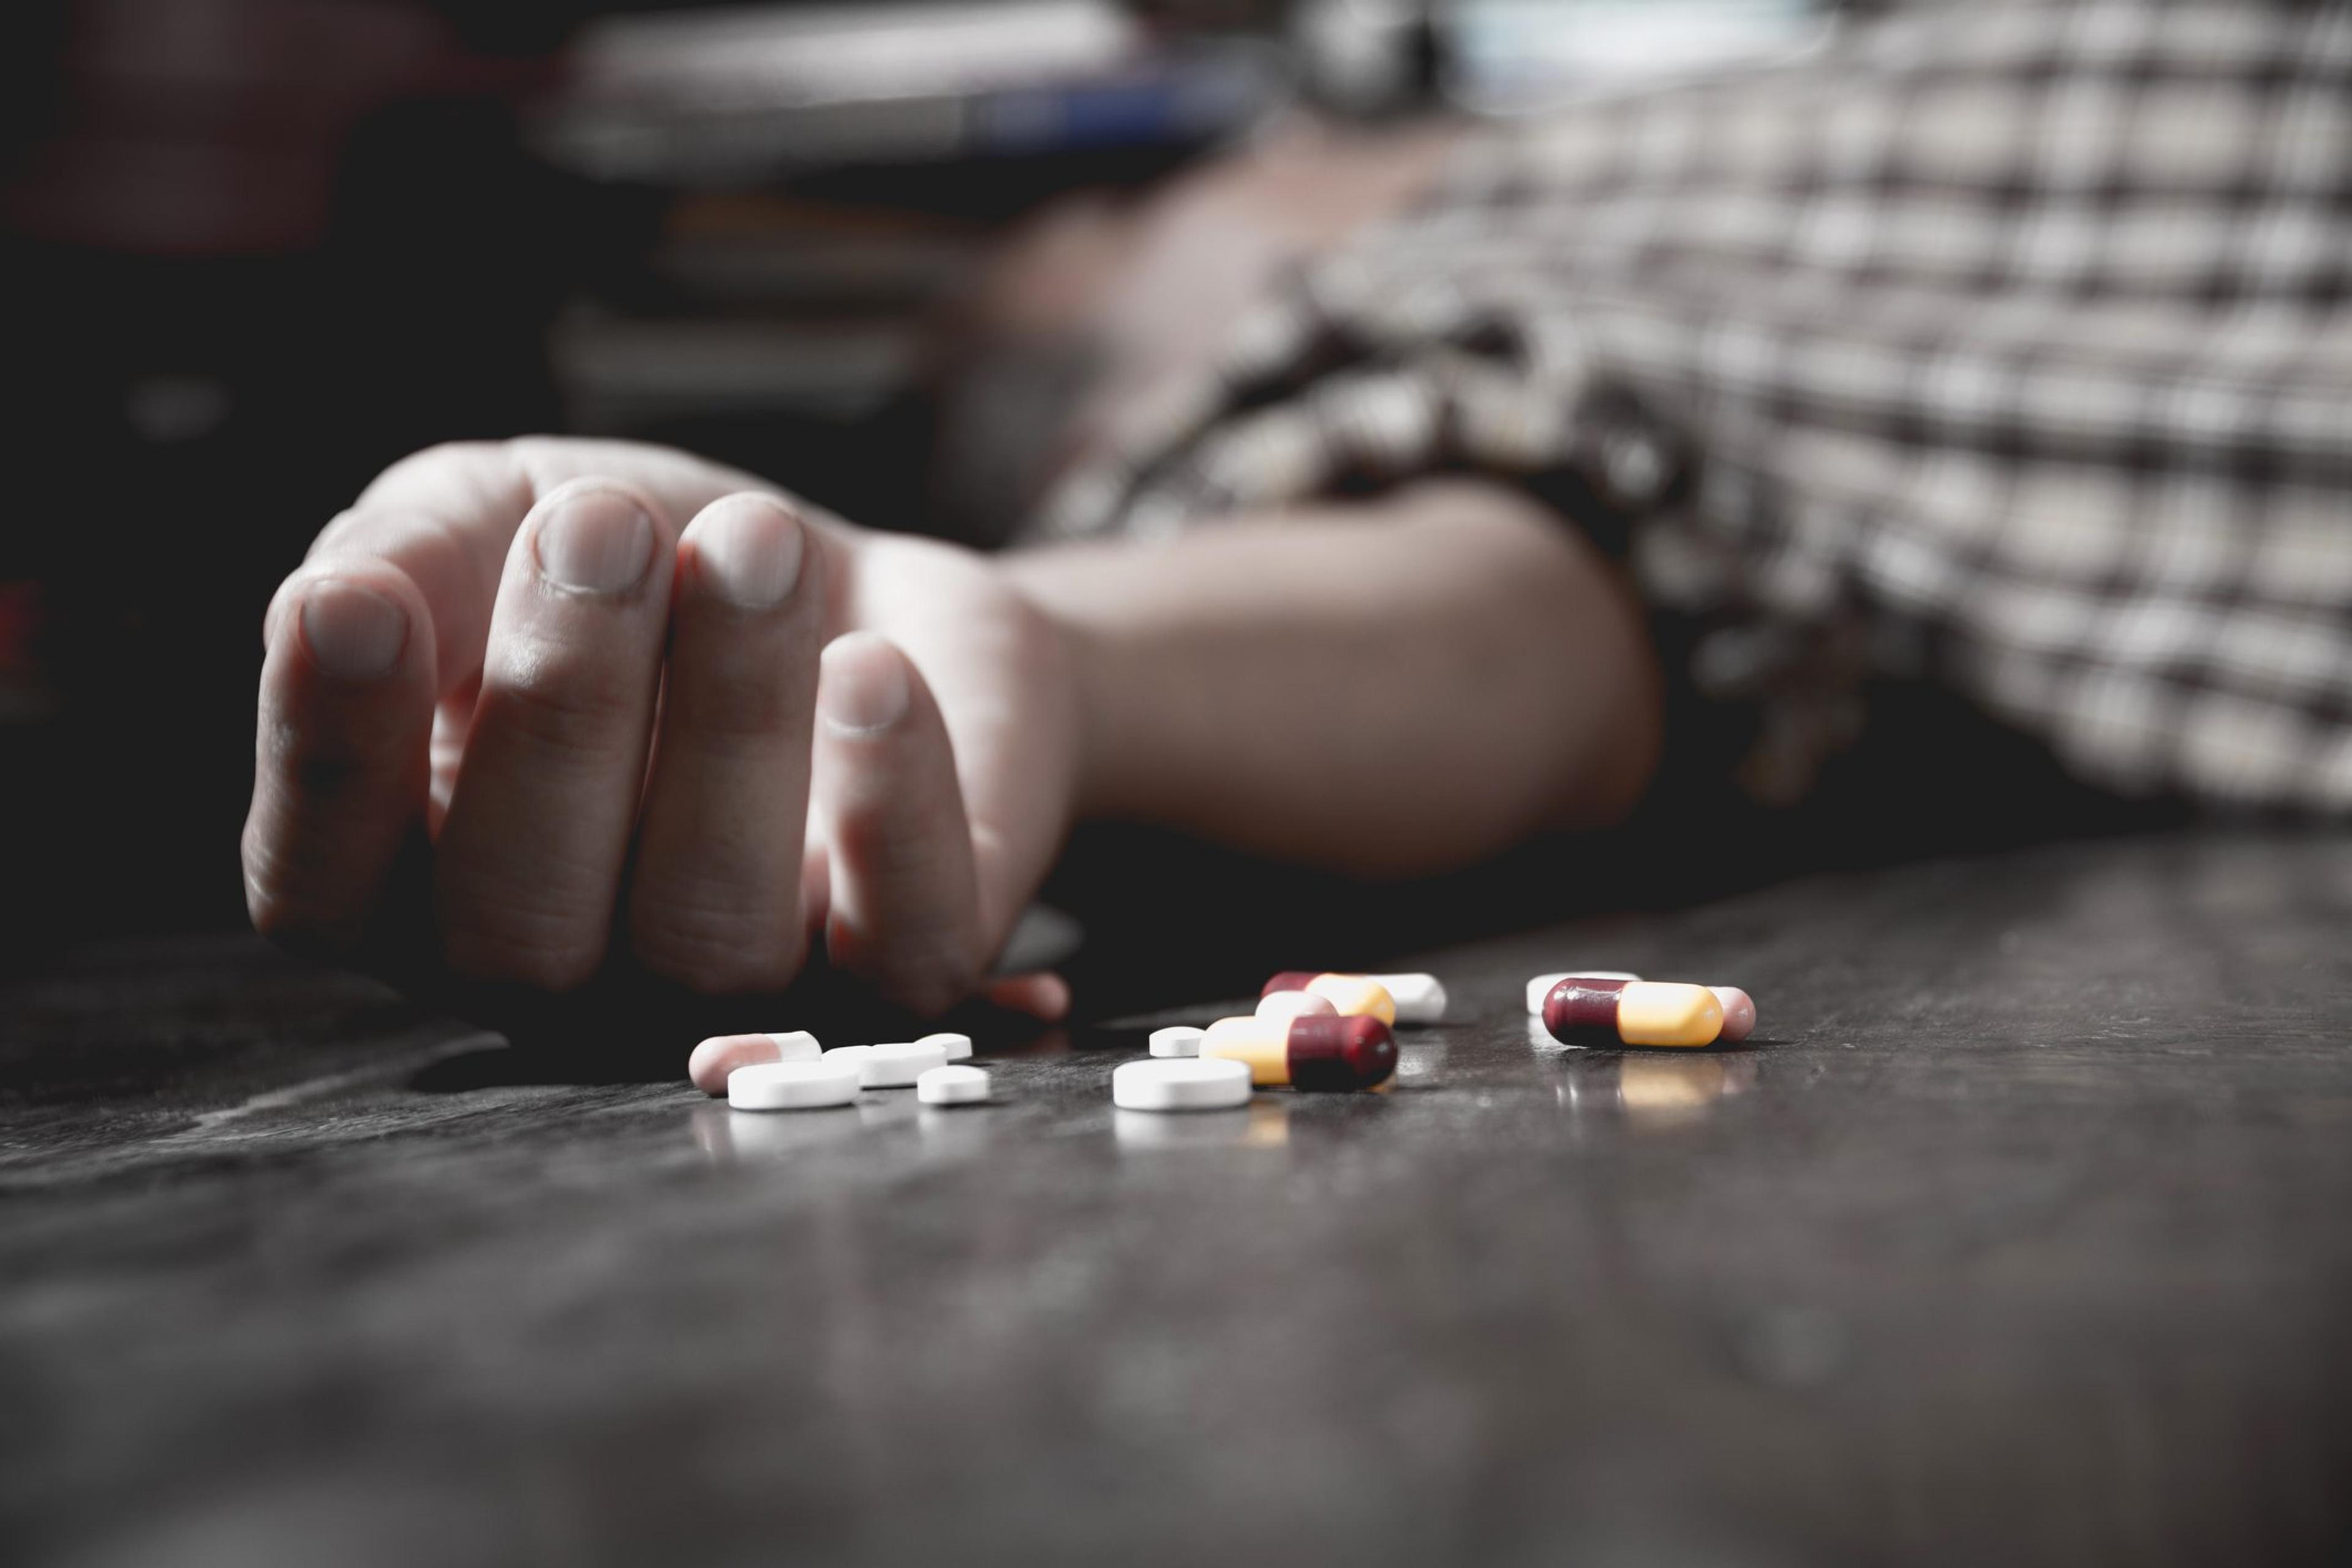 Approximately every eight minutes a person dies from an opioid overdose. There are many reasons for opioid overdose emergencies, and most often they happen accidentally and at home. 